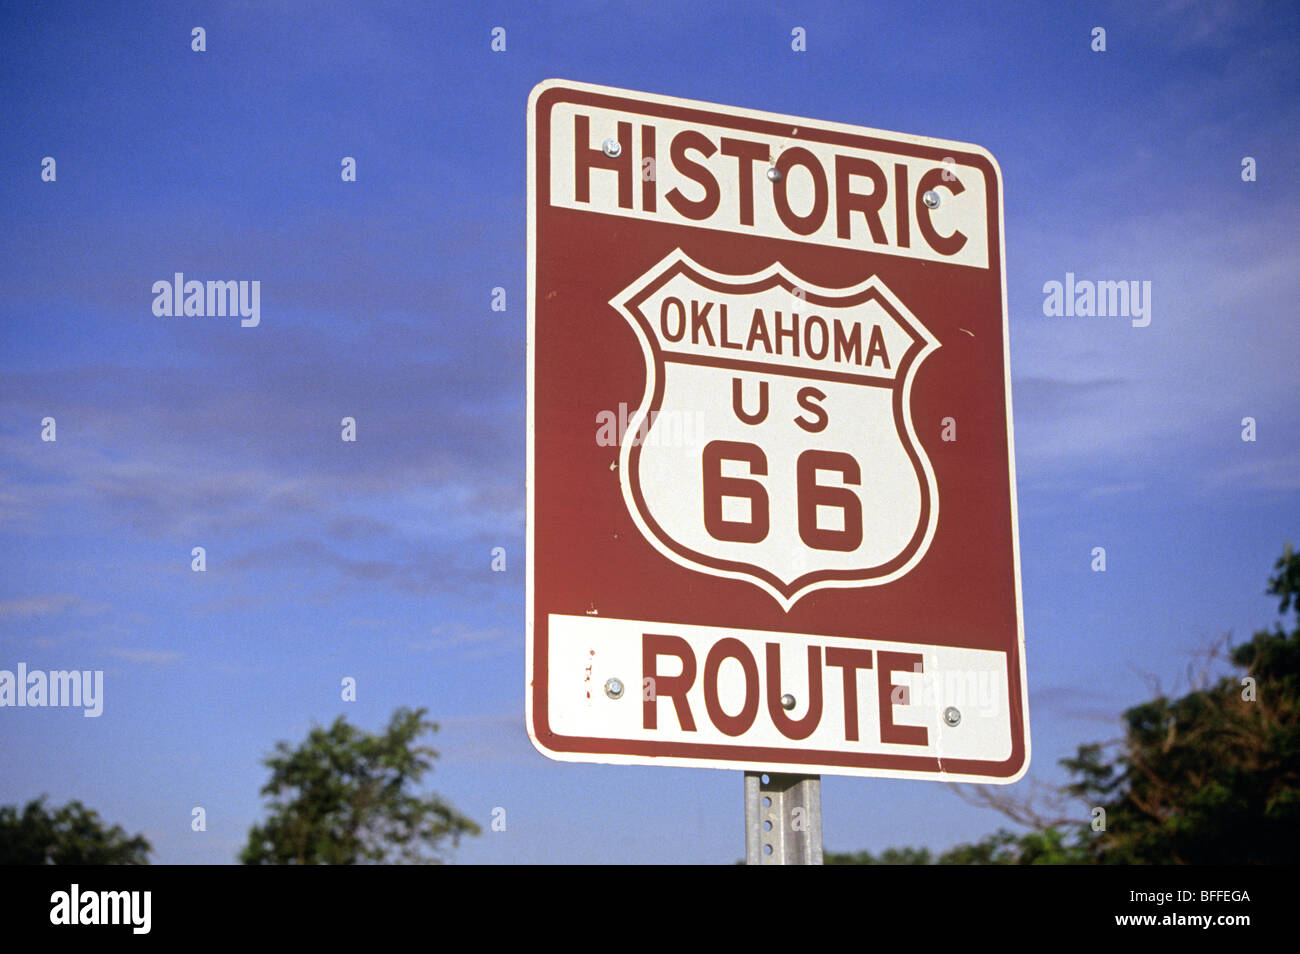 A road sign for historic Highway Route 66 in Oklahoma Stock Photo - Alamy